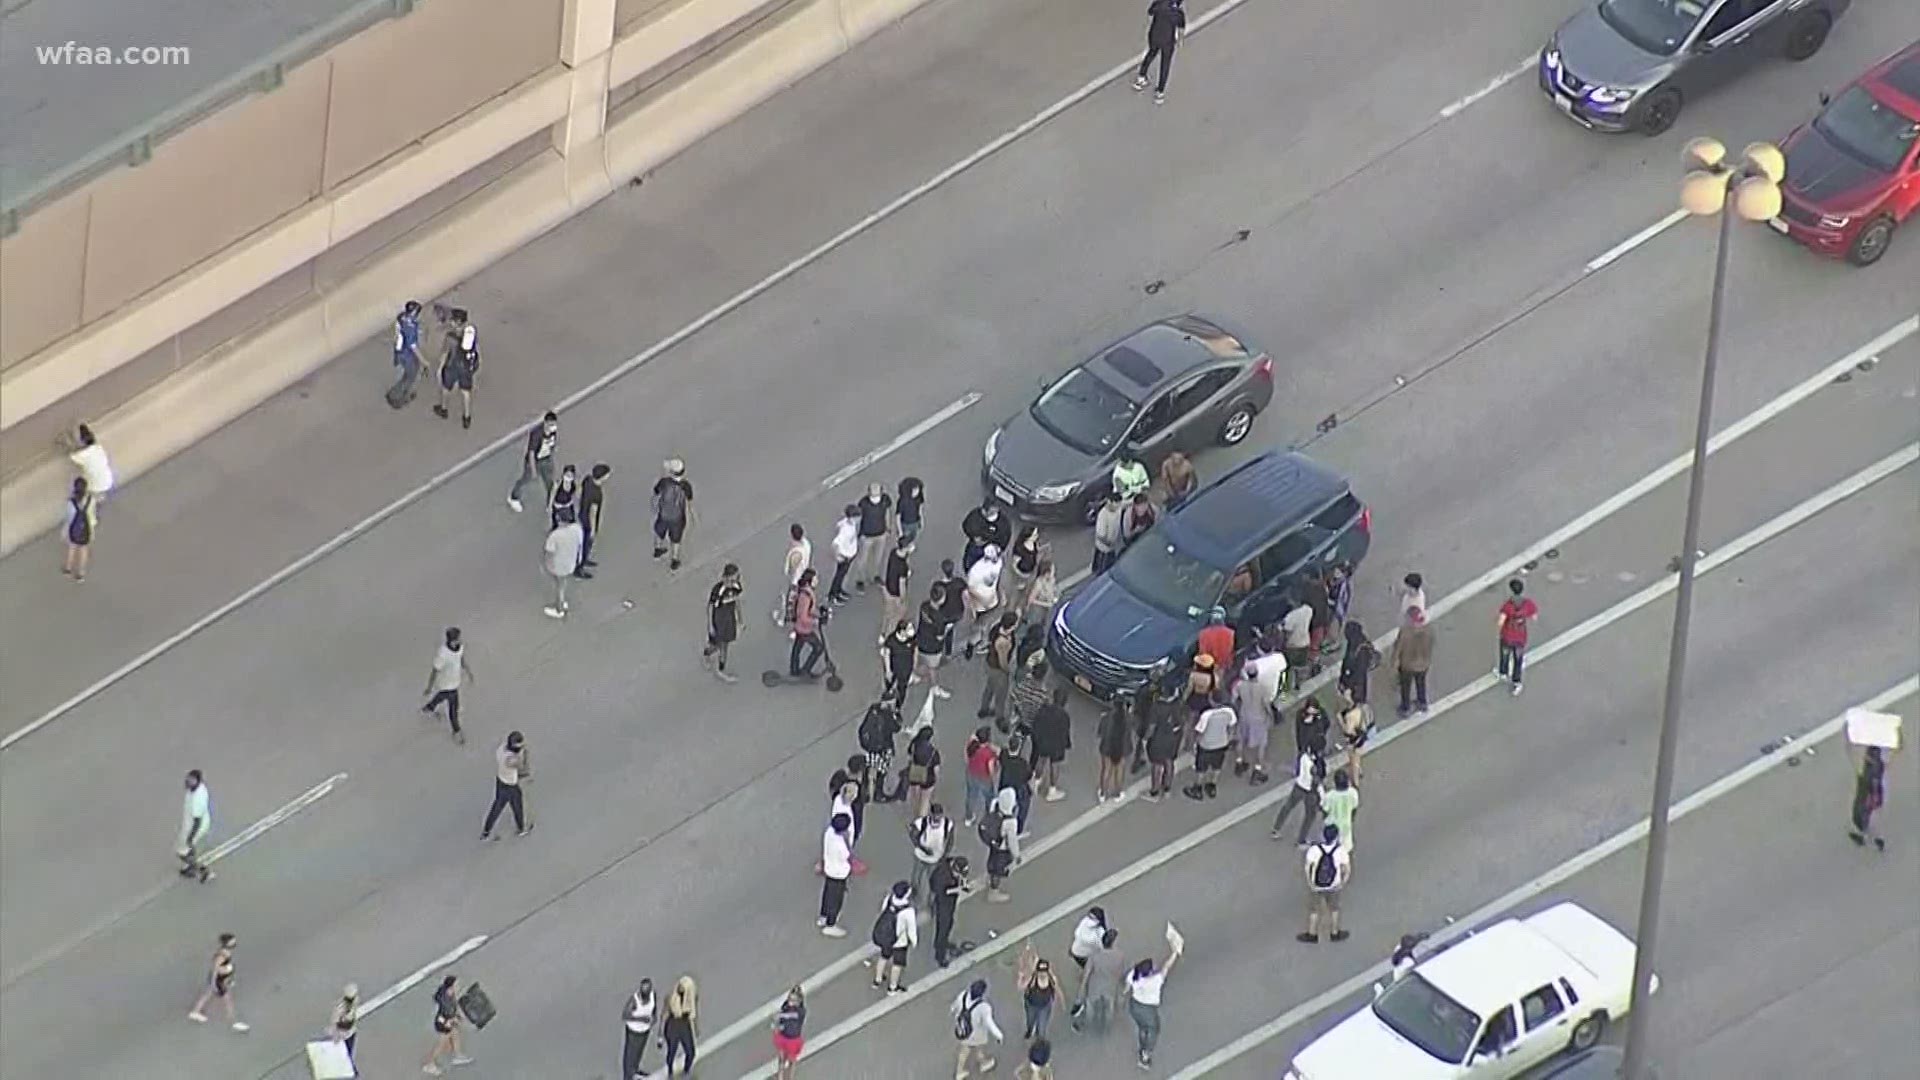 At least five protesters were arrested after blocking traffic on a Dallas highway